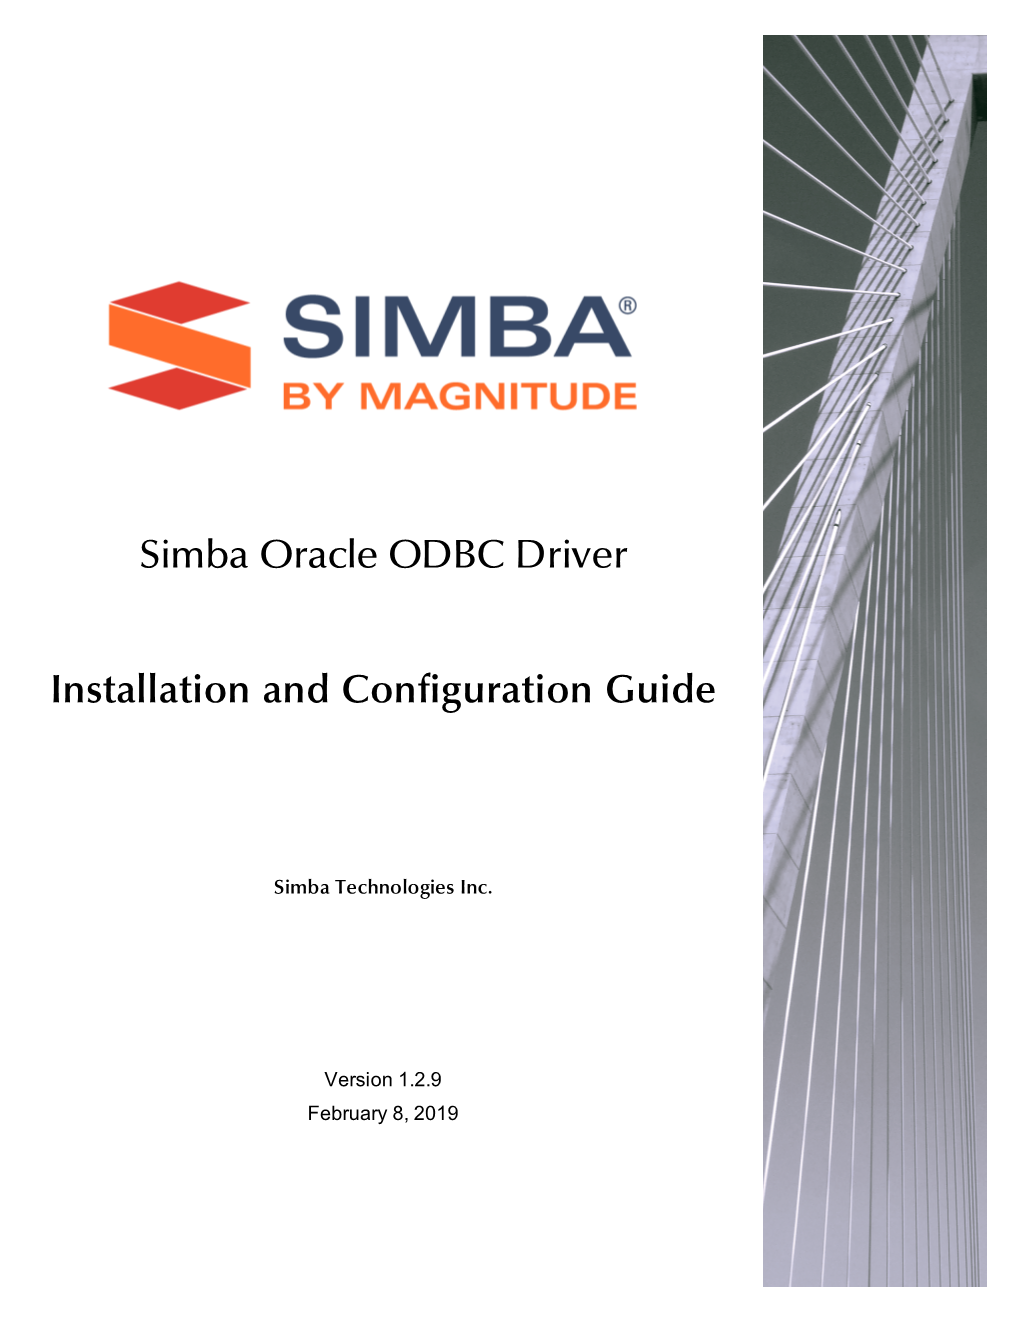 Simba Oracle ODBC Driver Installation and Configuration Guide Explains How to Install and Configure the Simba Oracle ODBC Driver